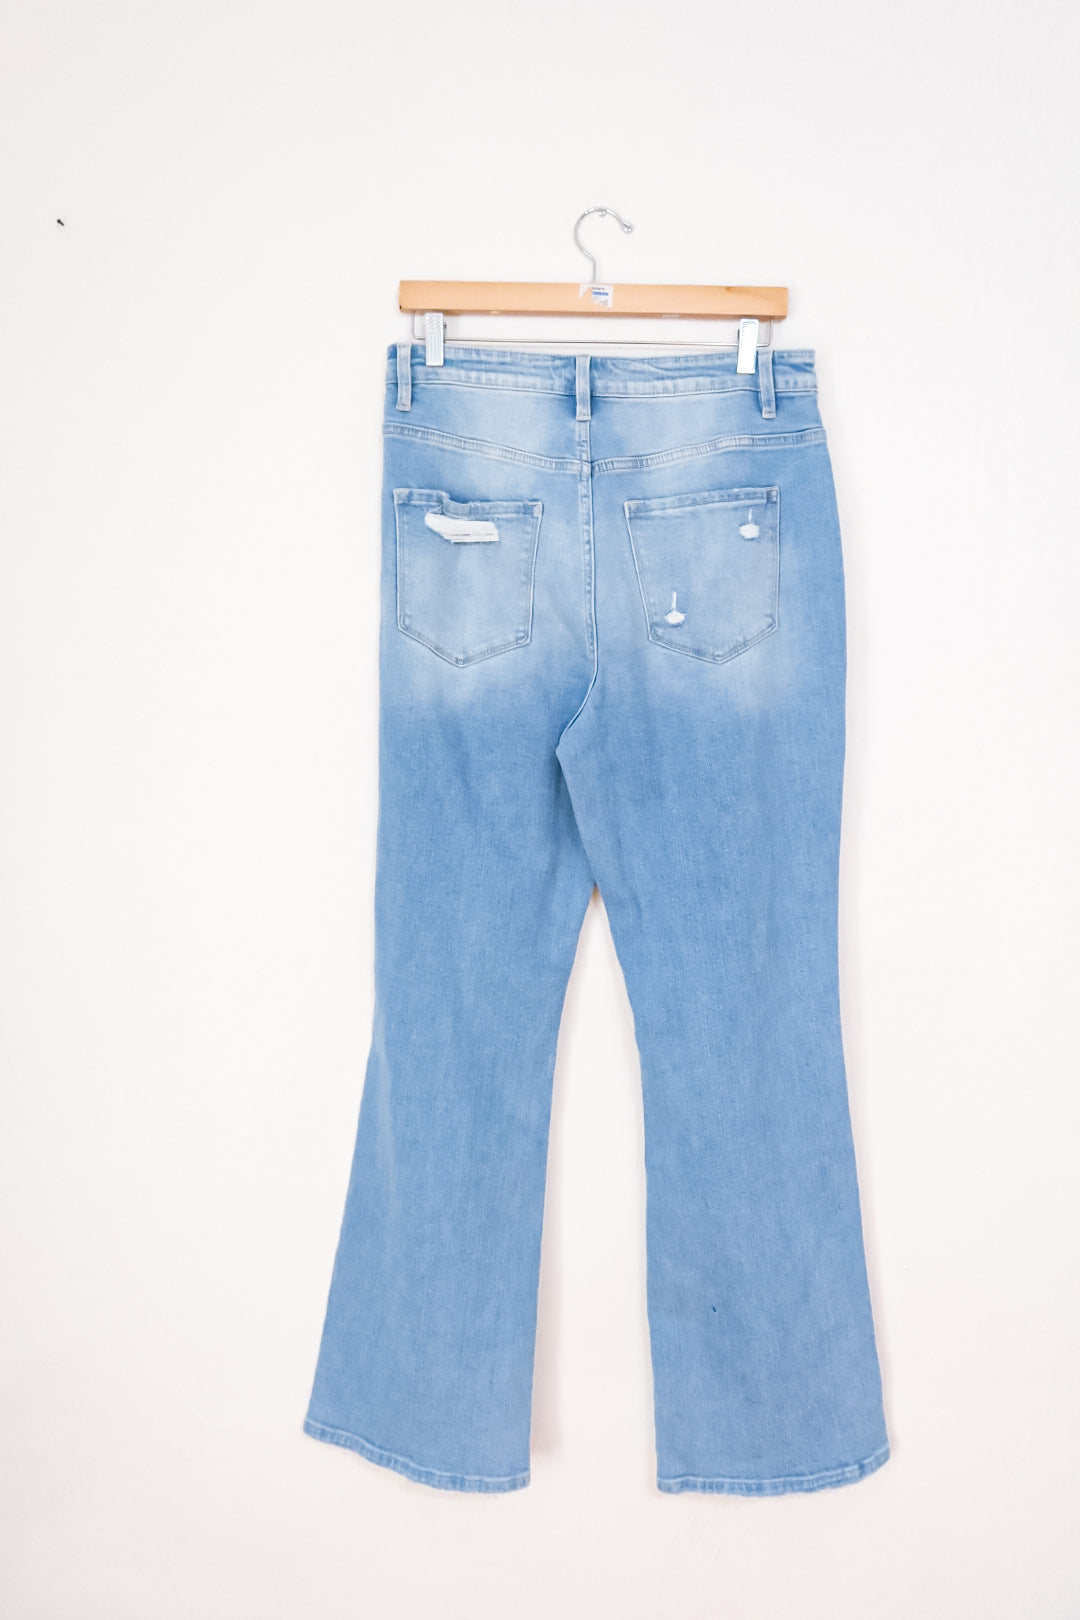 Flying Monkey Distressed Flare Jeans (30)